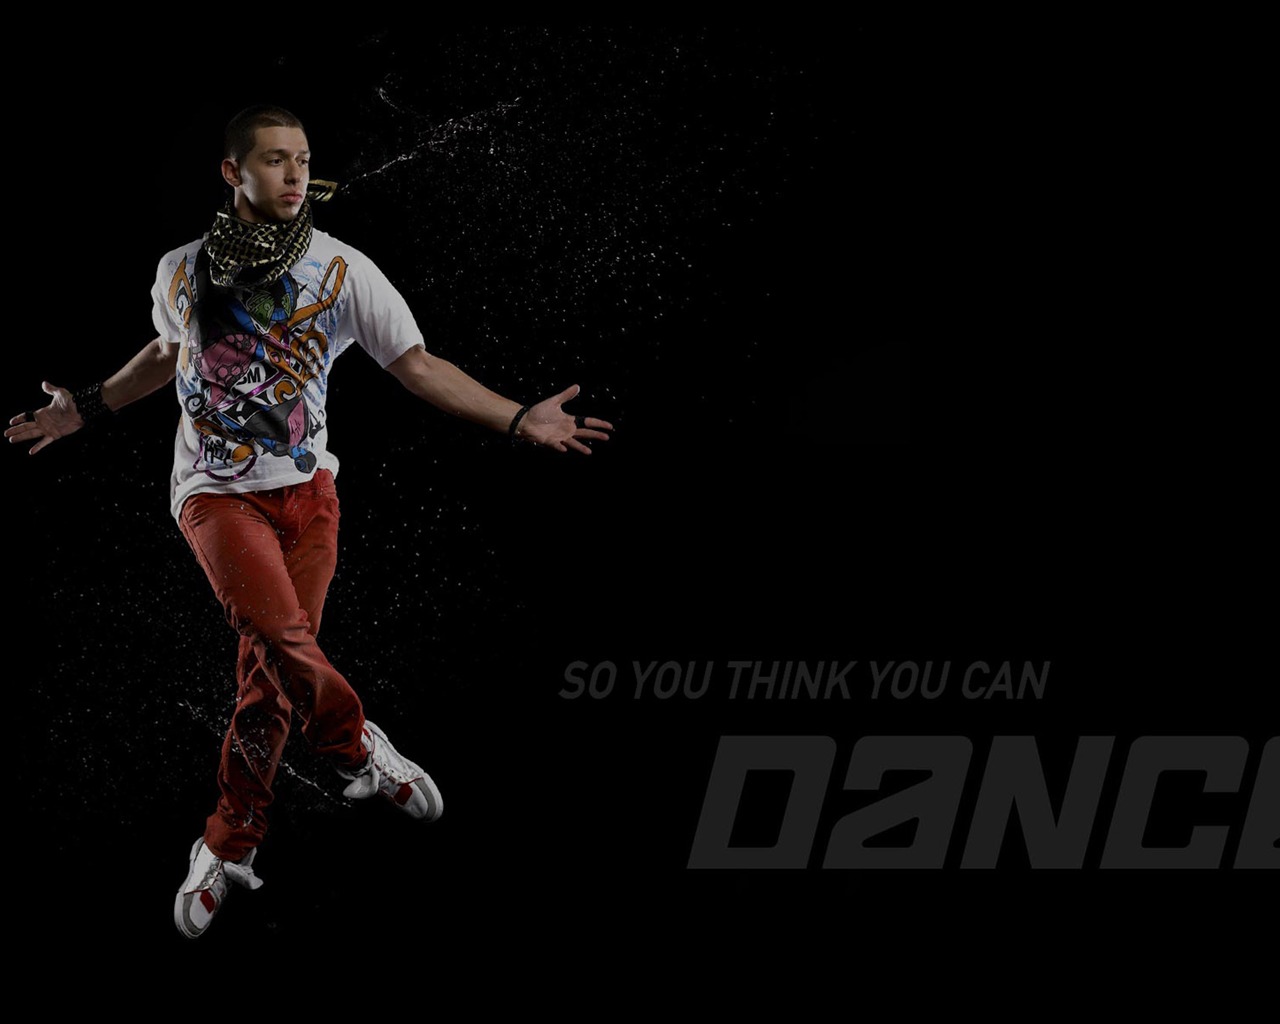 So You Think You Can Dance wallpaper (1) #16 - 1280x1024